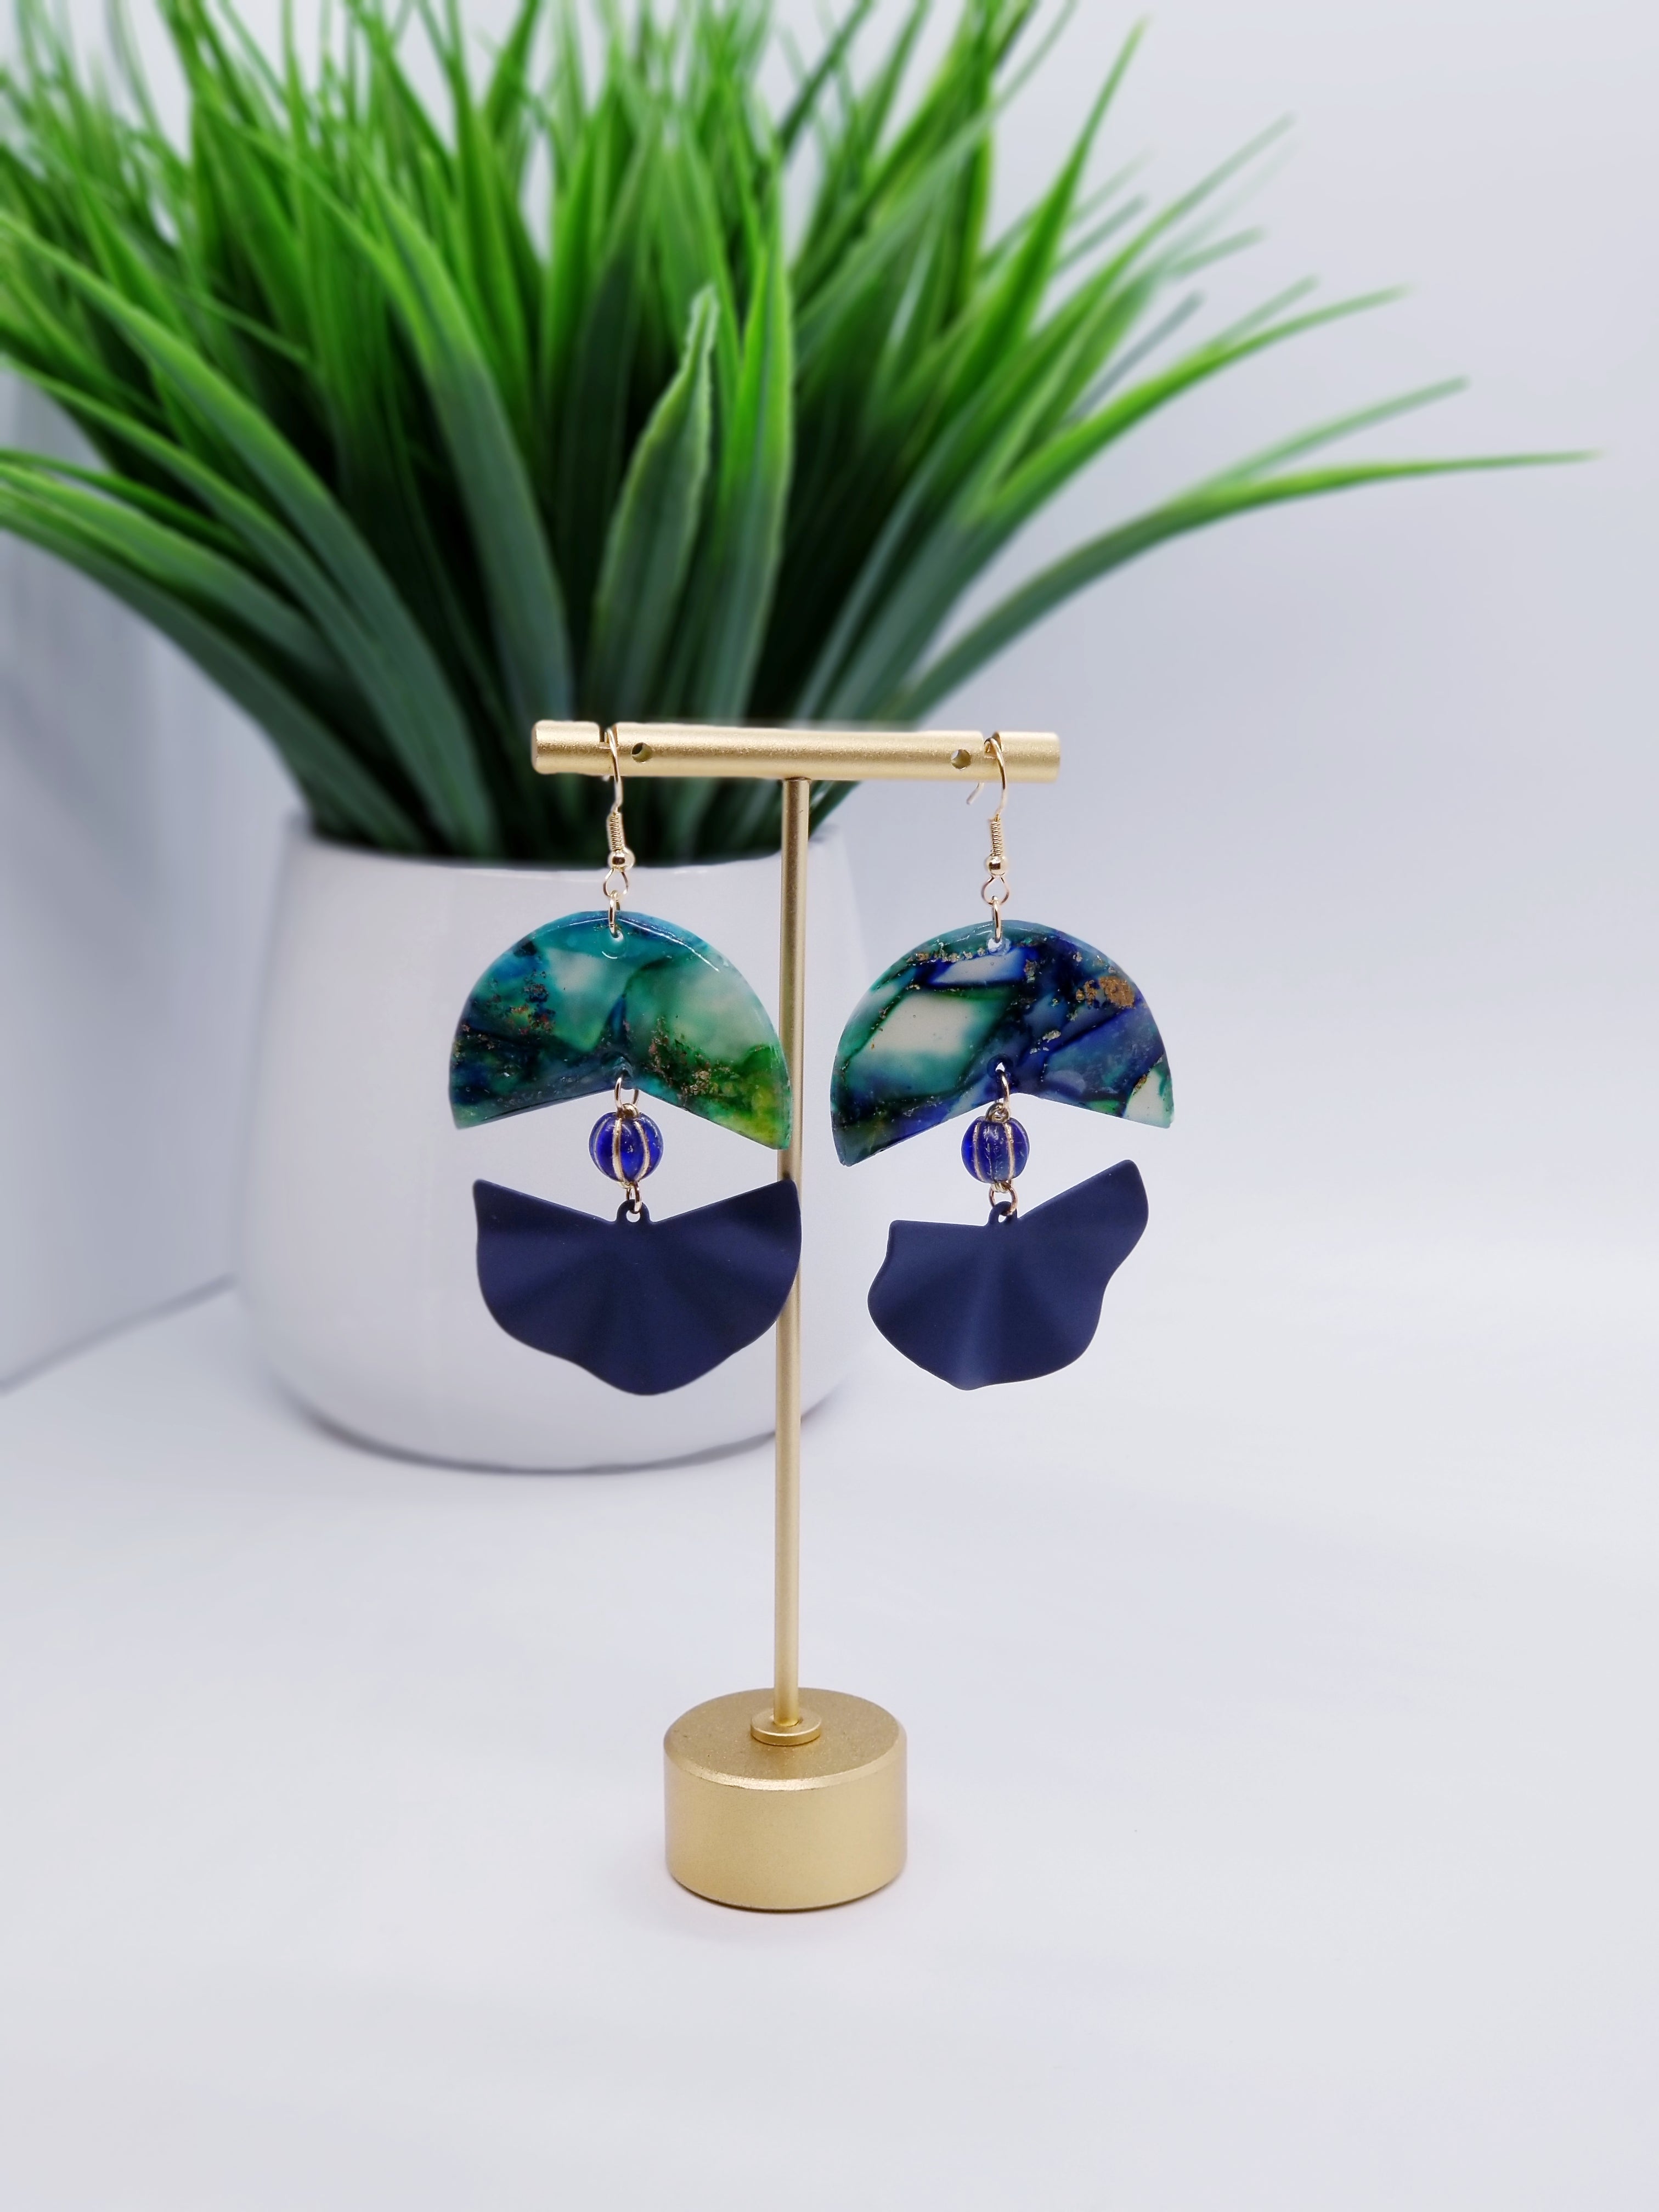 Length: 3 inches | Weight: 0.7 ounces  Designed just for you! The earrings are handmade using green blue and swirl gold resin design, matte blue fanned covered charm, 8mm blue Czech melon beads, and hypoallergenic hooks with back closures. 